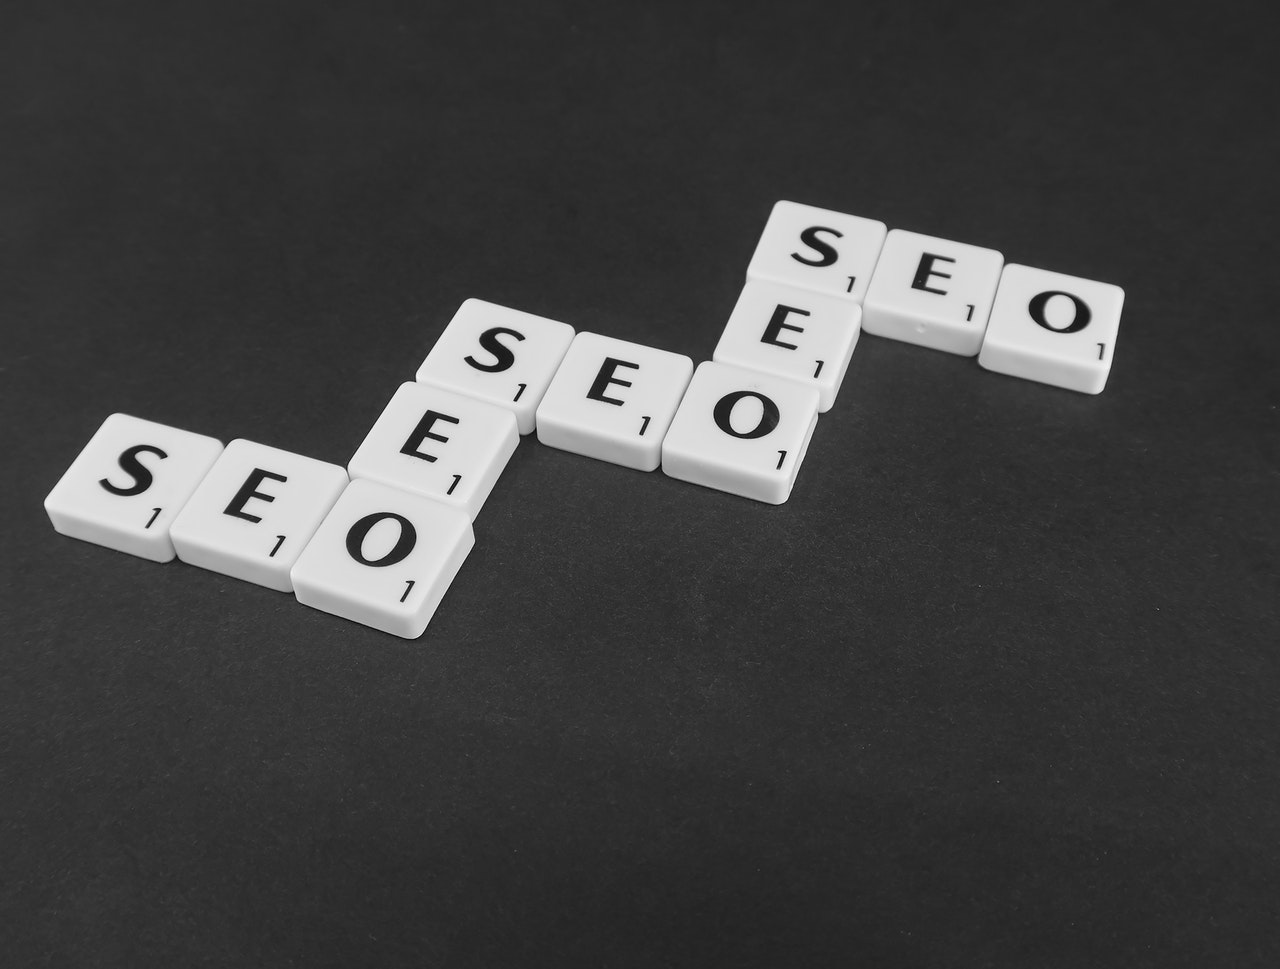 seo letters